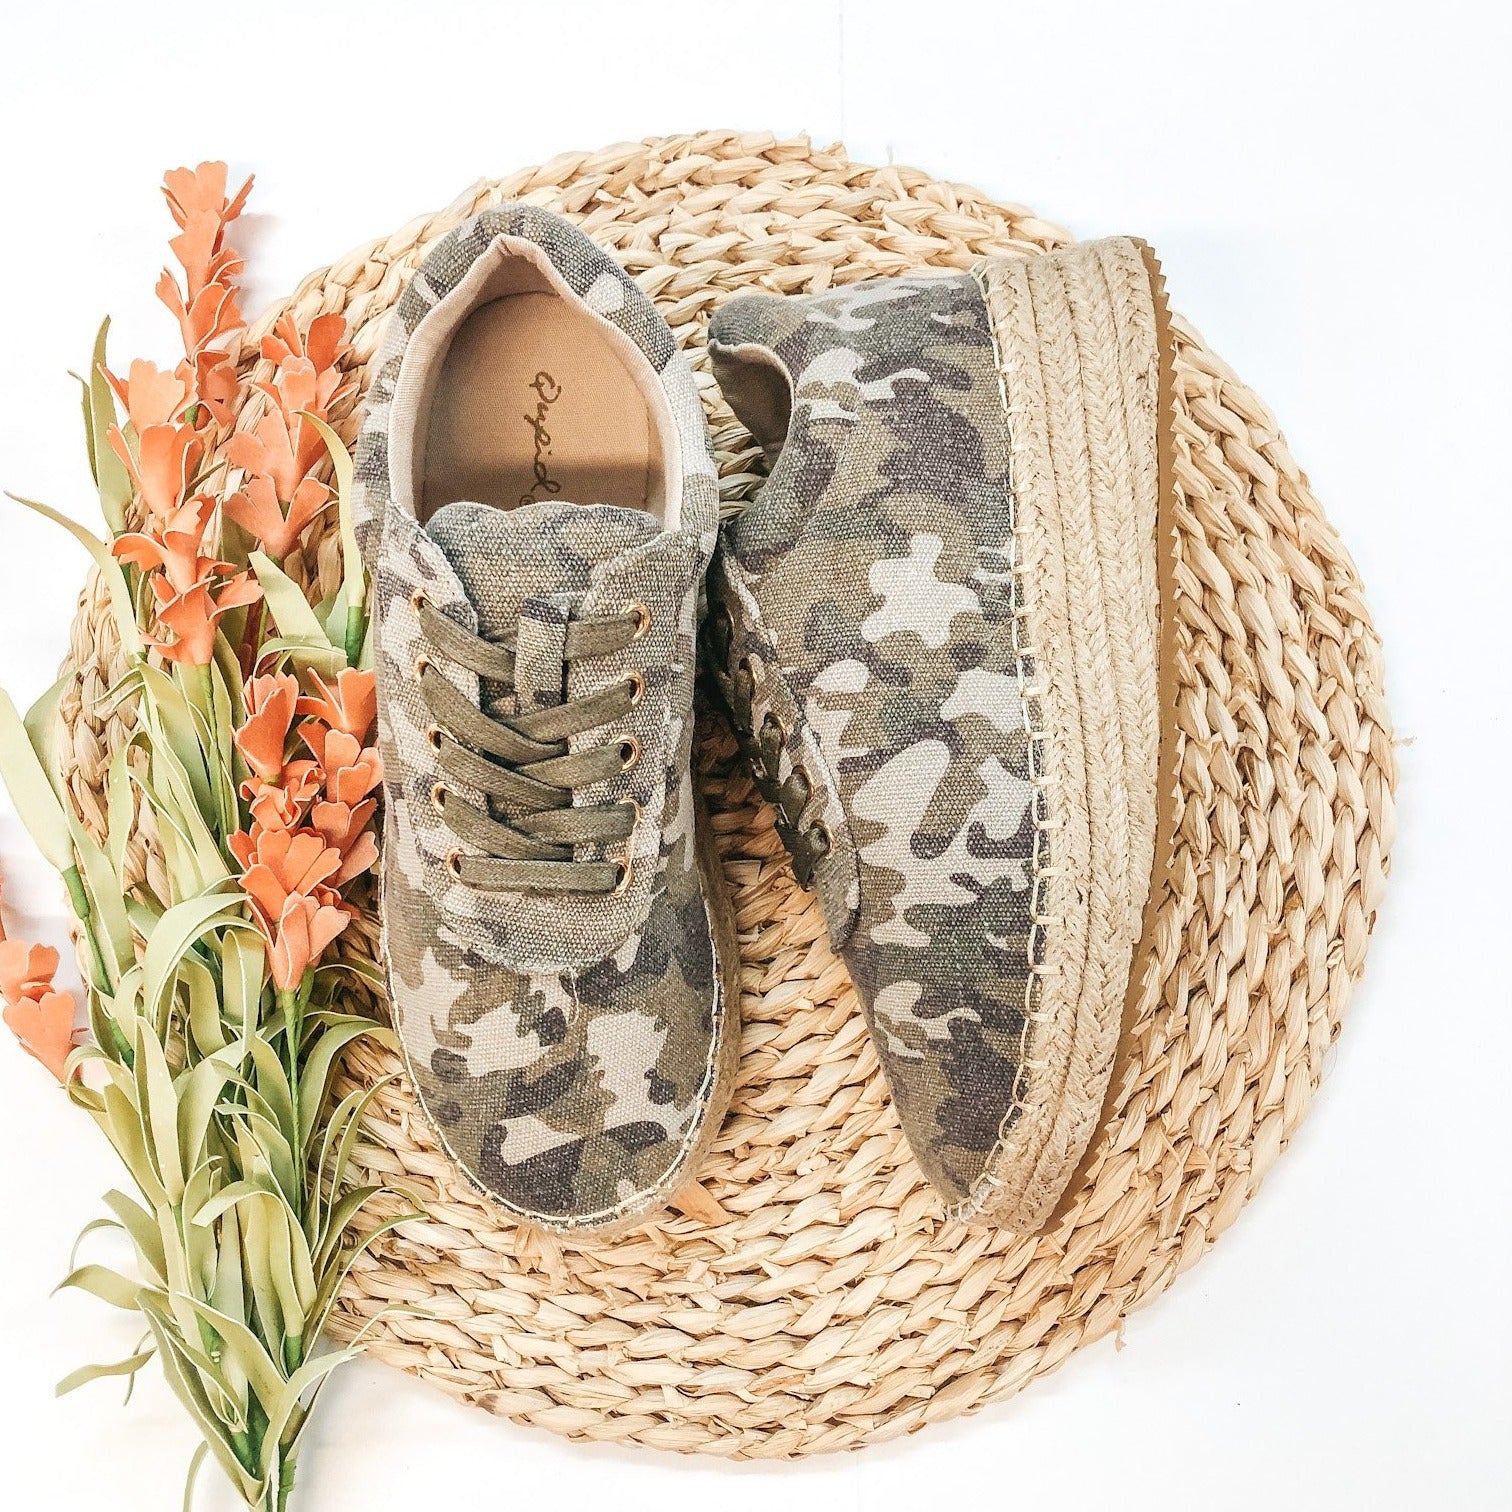 Last Chance Size 6, 7, & 8 | Ready to Roam Lace Up Espadrille Sneakers in Camo - Giddy Up Glamour Boutique